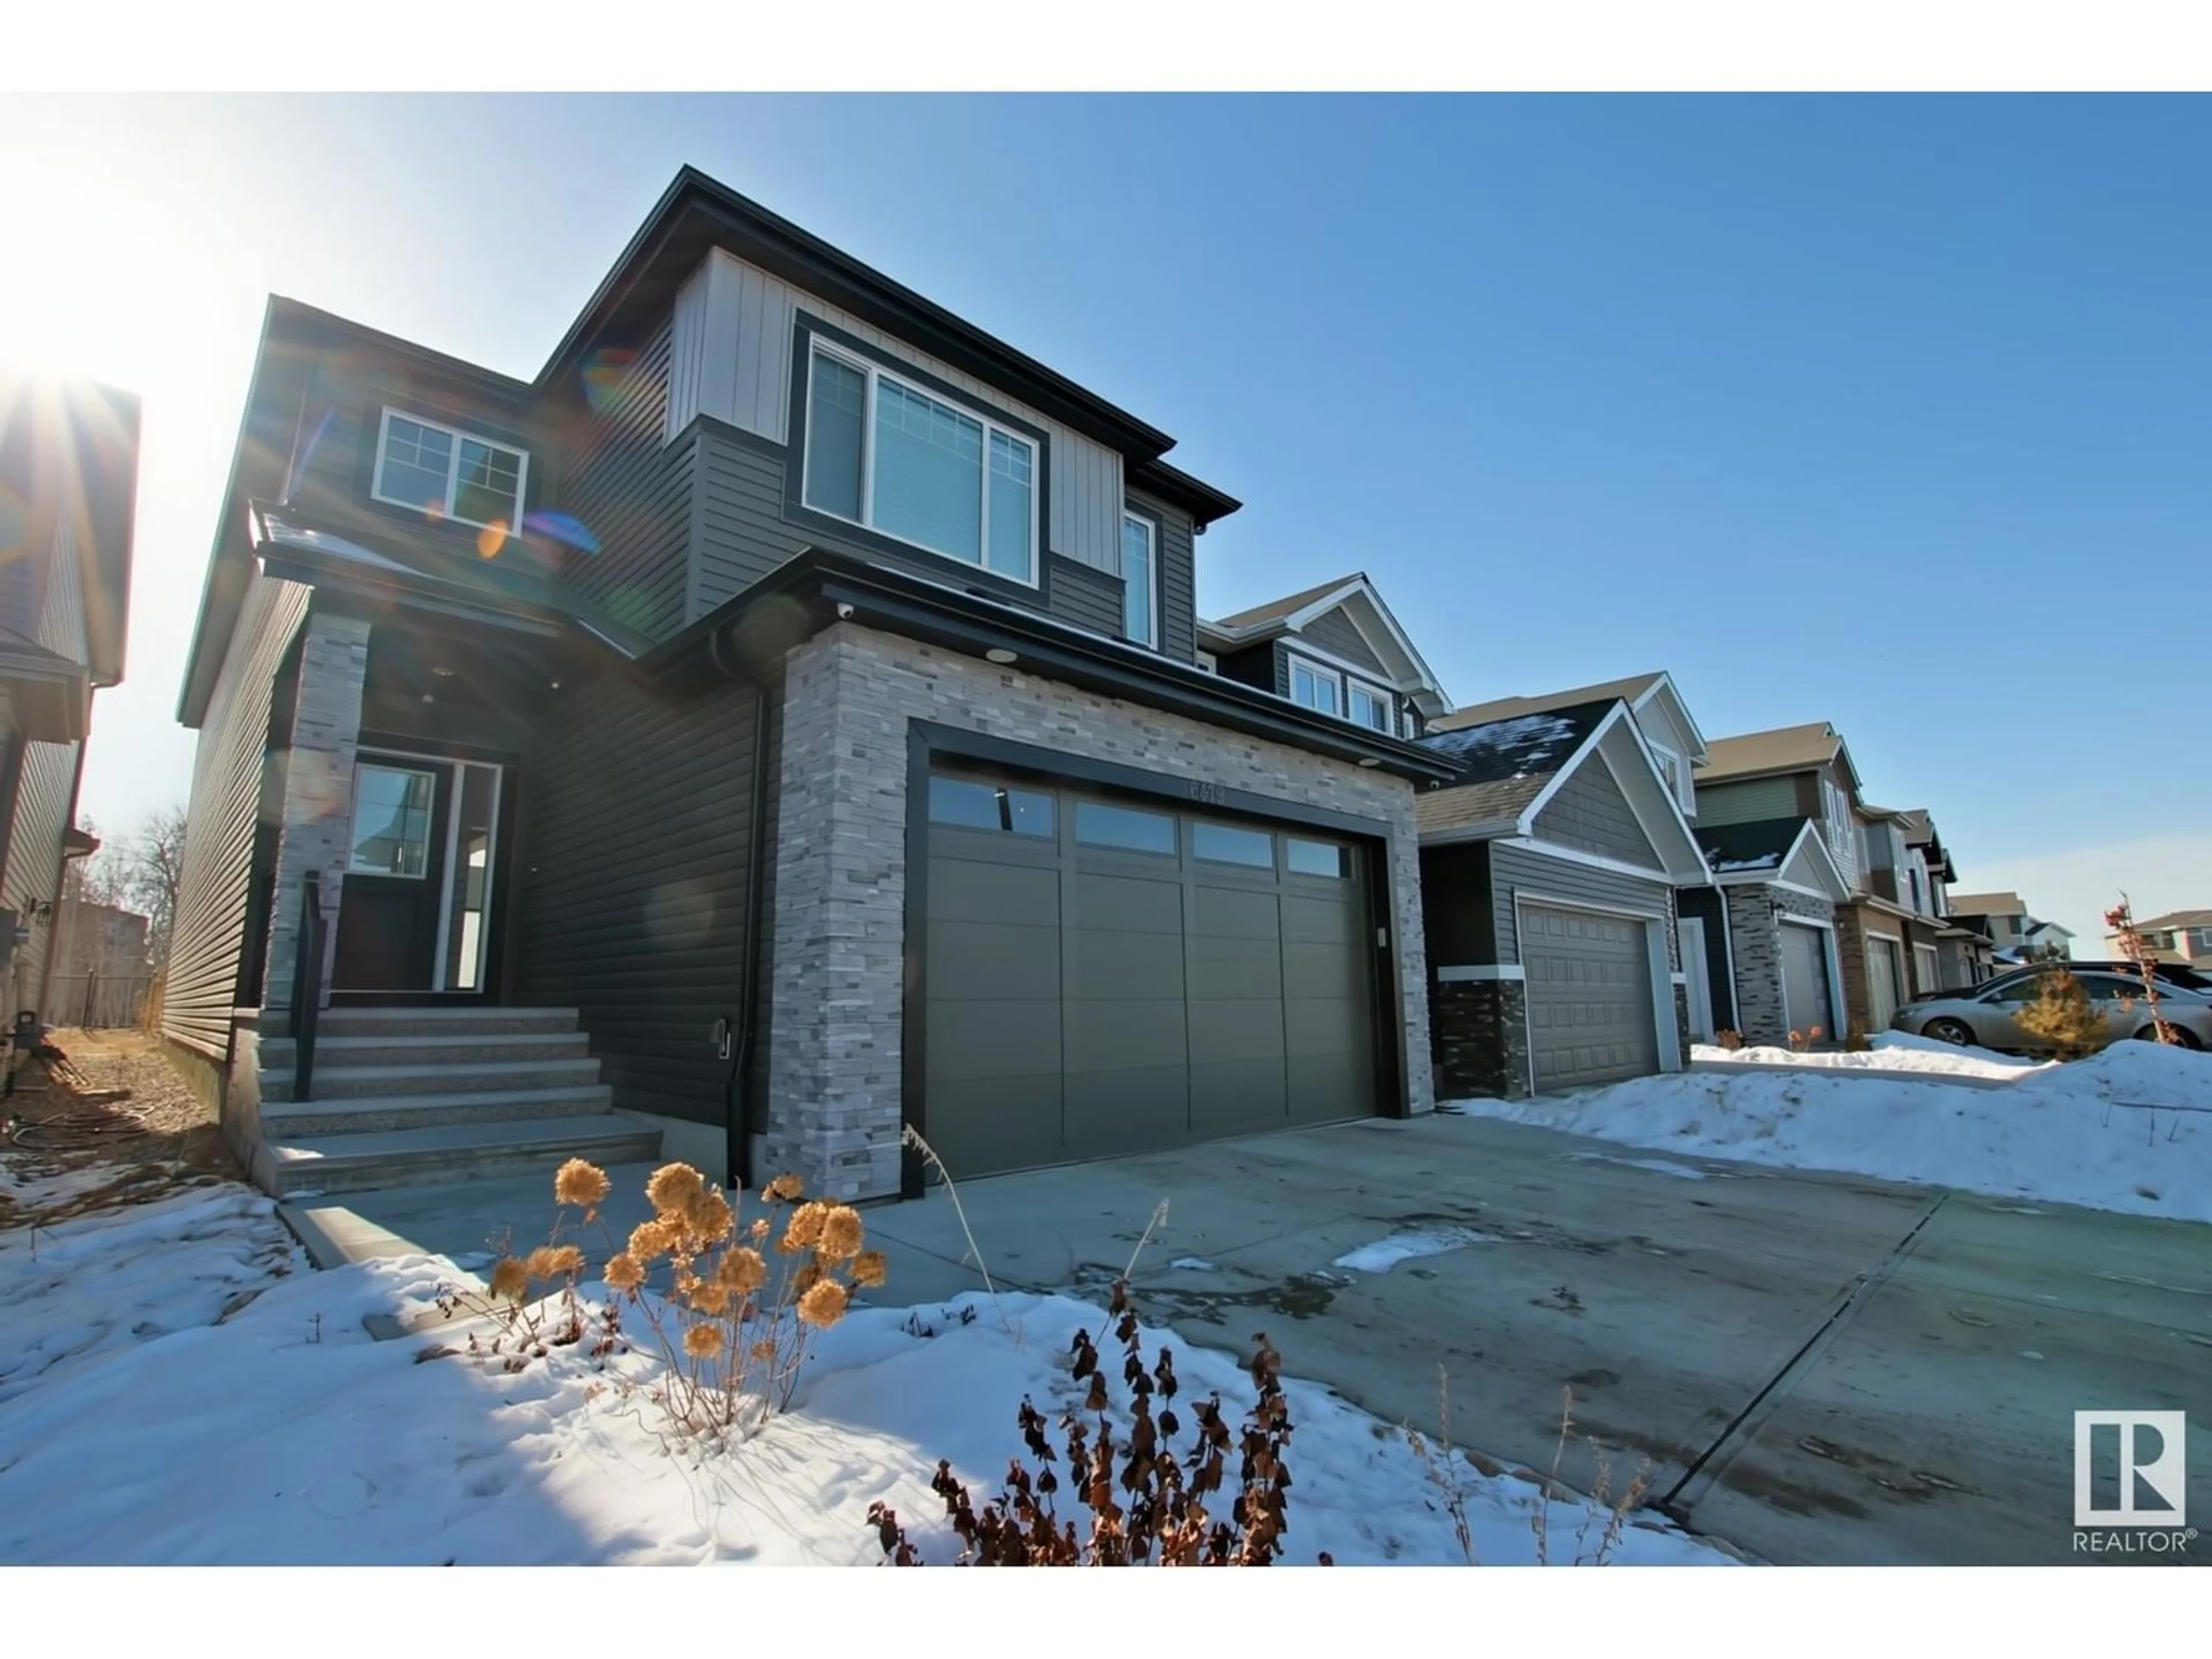 A pic from exterior of the house or condo for 6479 175 AV NW, Edmonton Alberta T5Y4A7